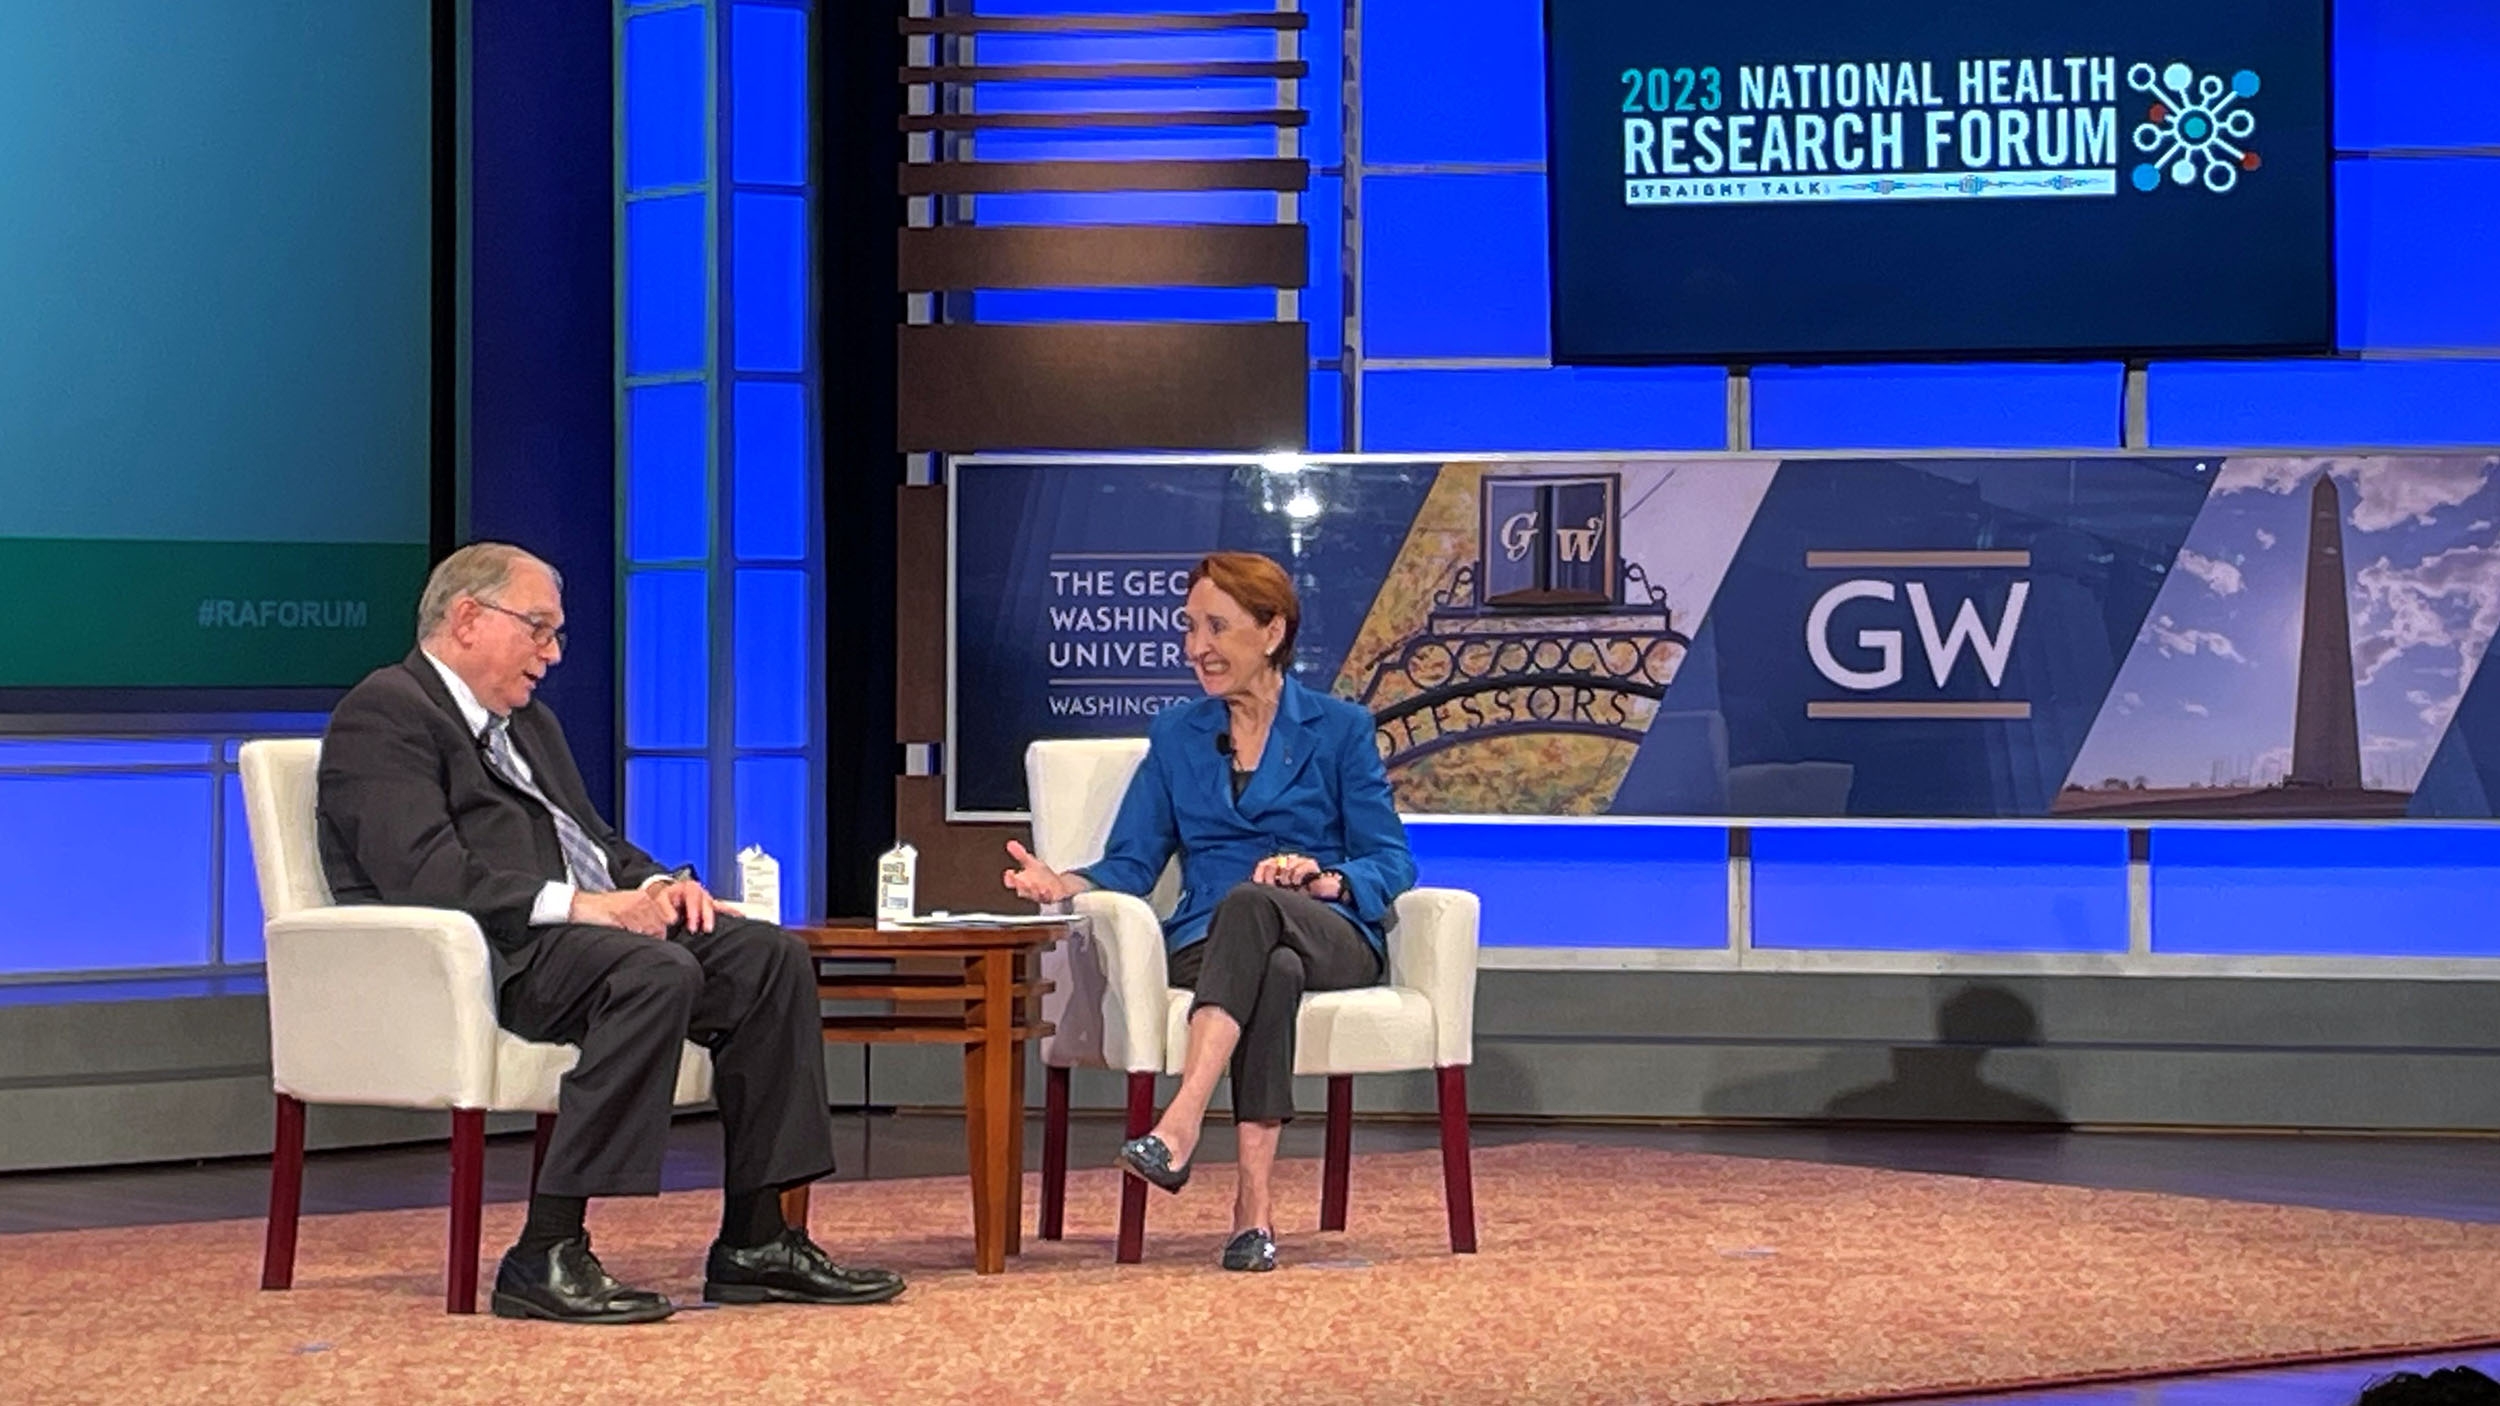 Lawrence Tabak talks with Mary Woolley on stage at the 2023 National Health Research Forum at George Washington University